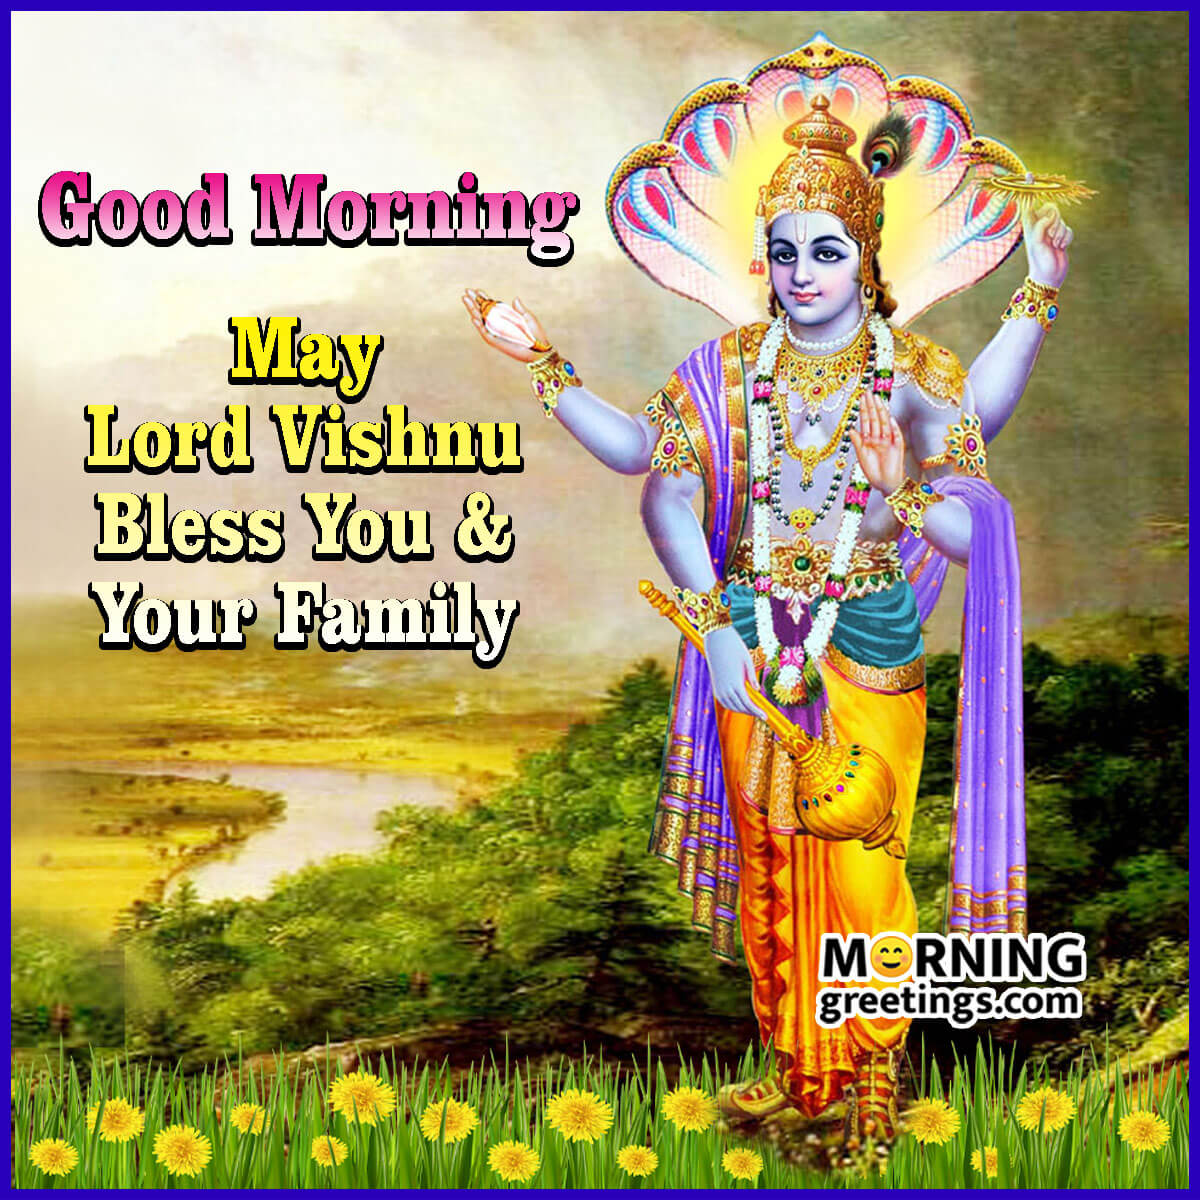 Good Morning May Lord Vishnu Bless You And Your Family